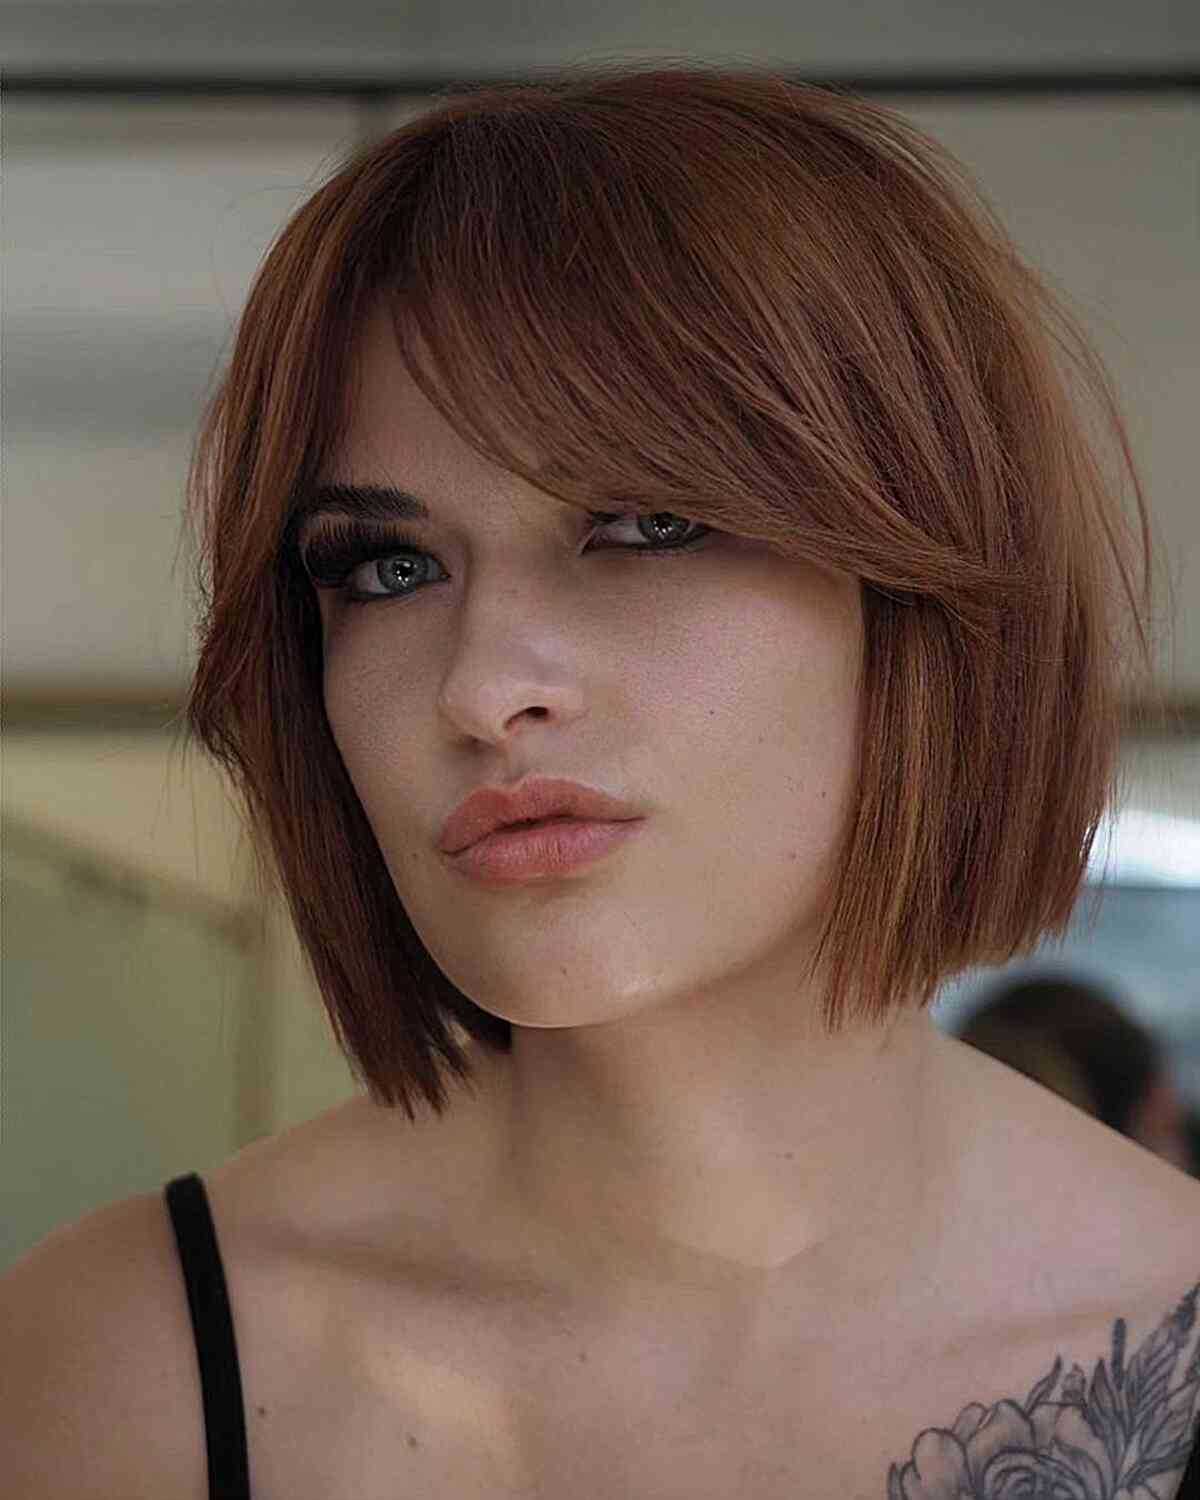 Chin-Length Blunt Chic Copper Slob Bob Cut for ladies with short straight hair